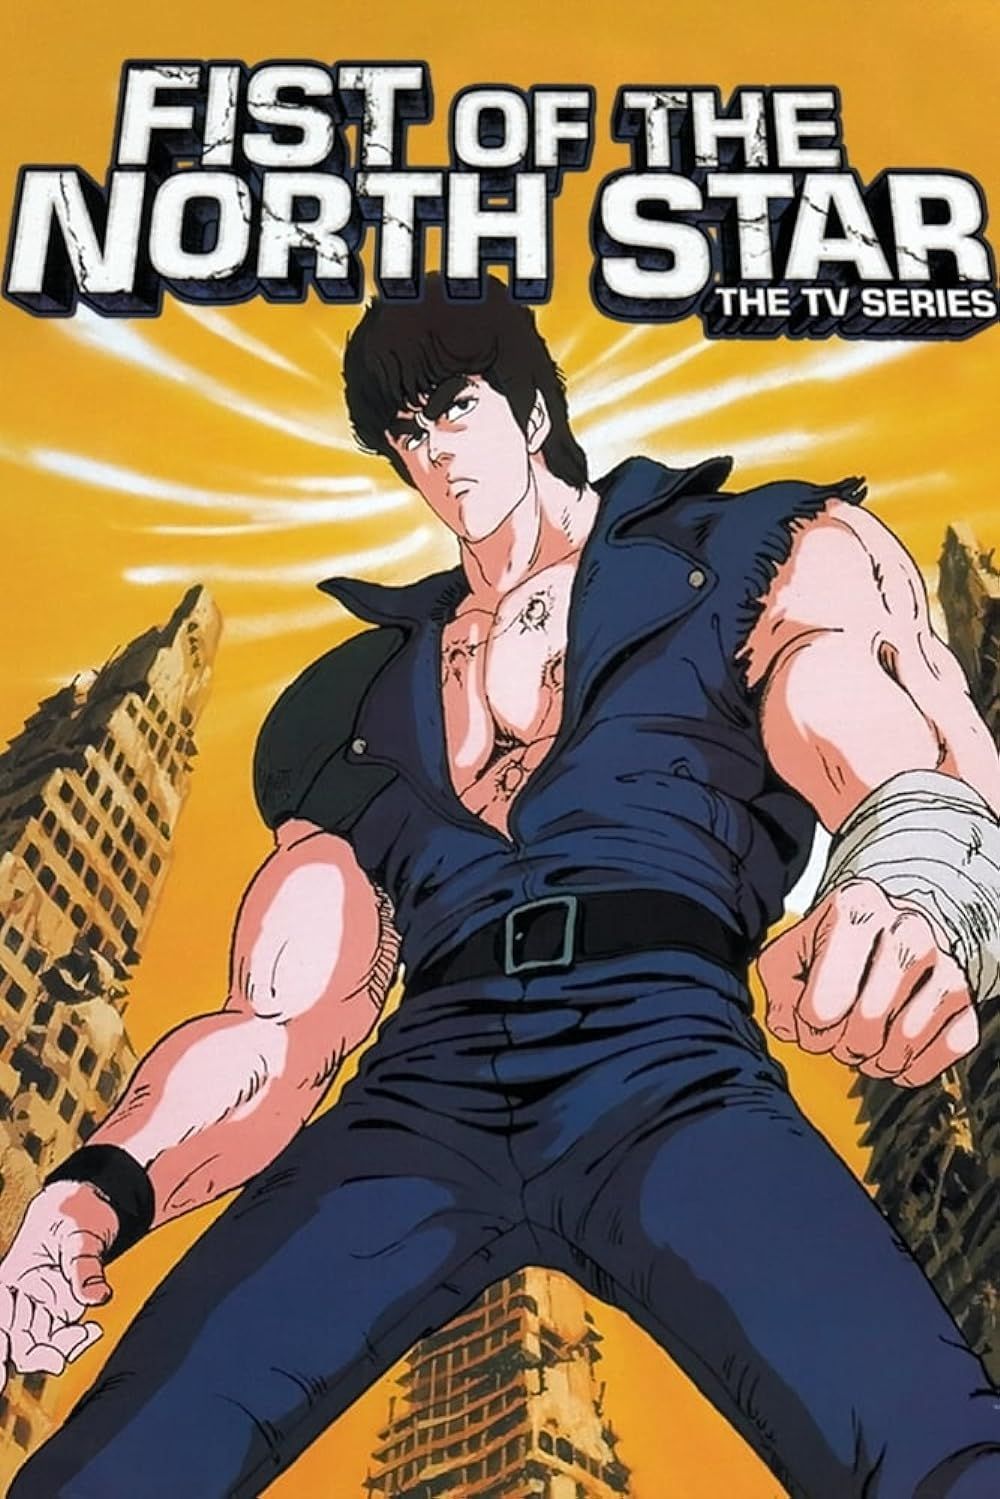 Kenshiro on the poster for Fist of the North Star